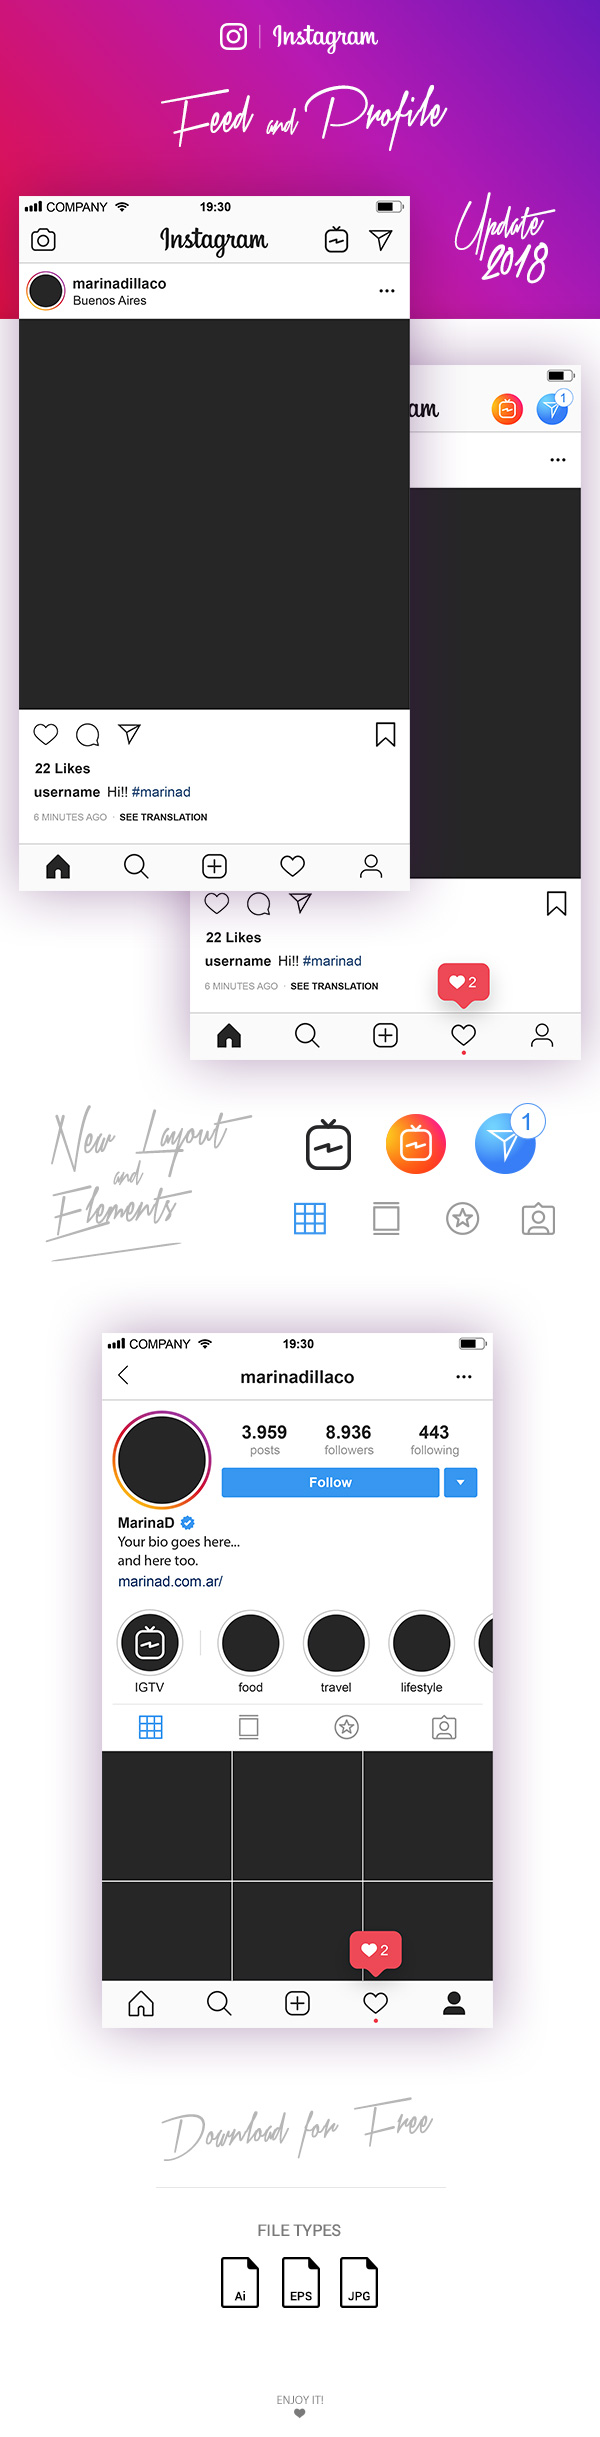 FREE Instagram Layout Feed and Profile UI – 2018 | MarinaD